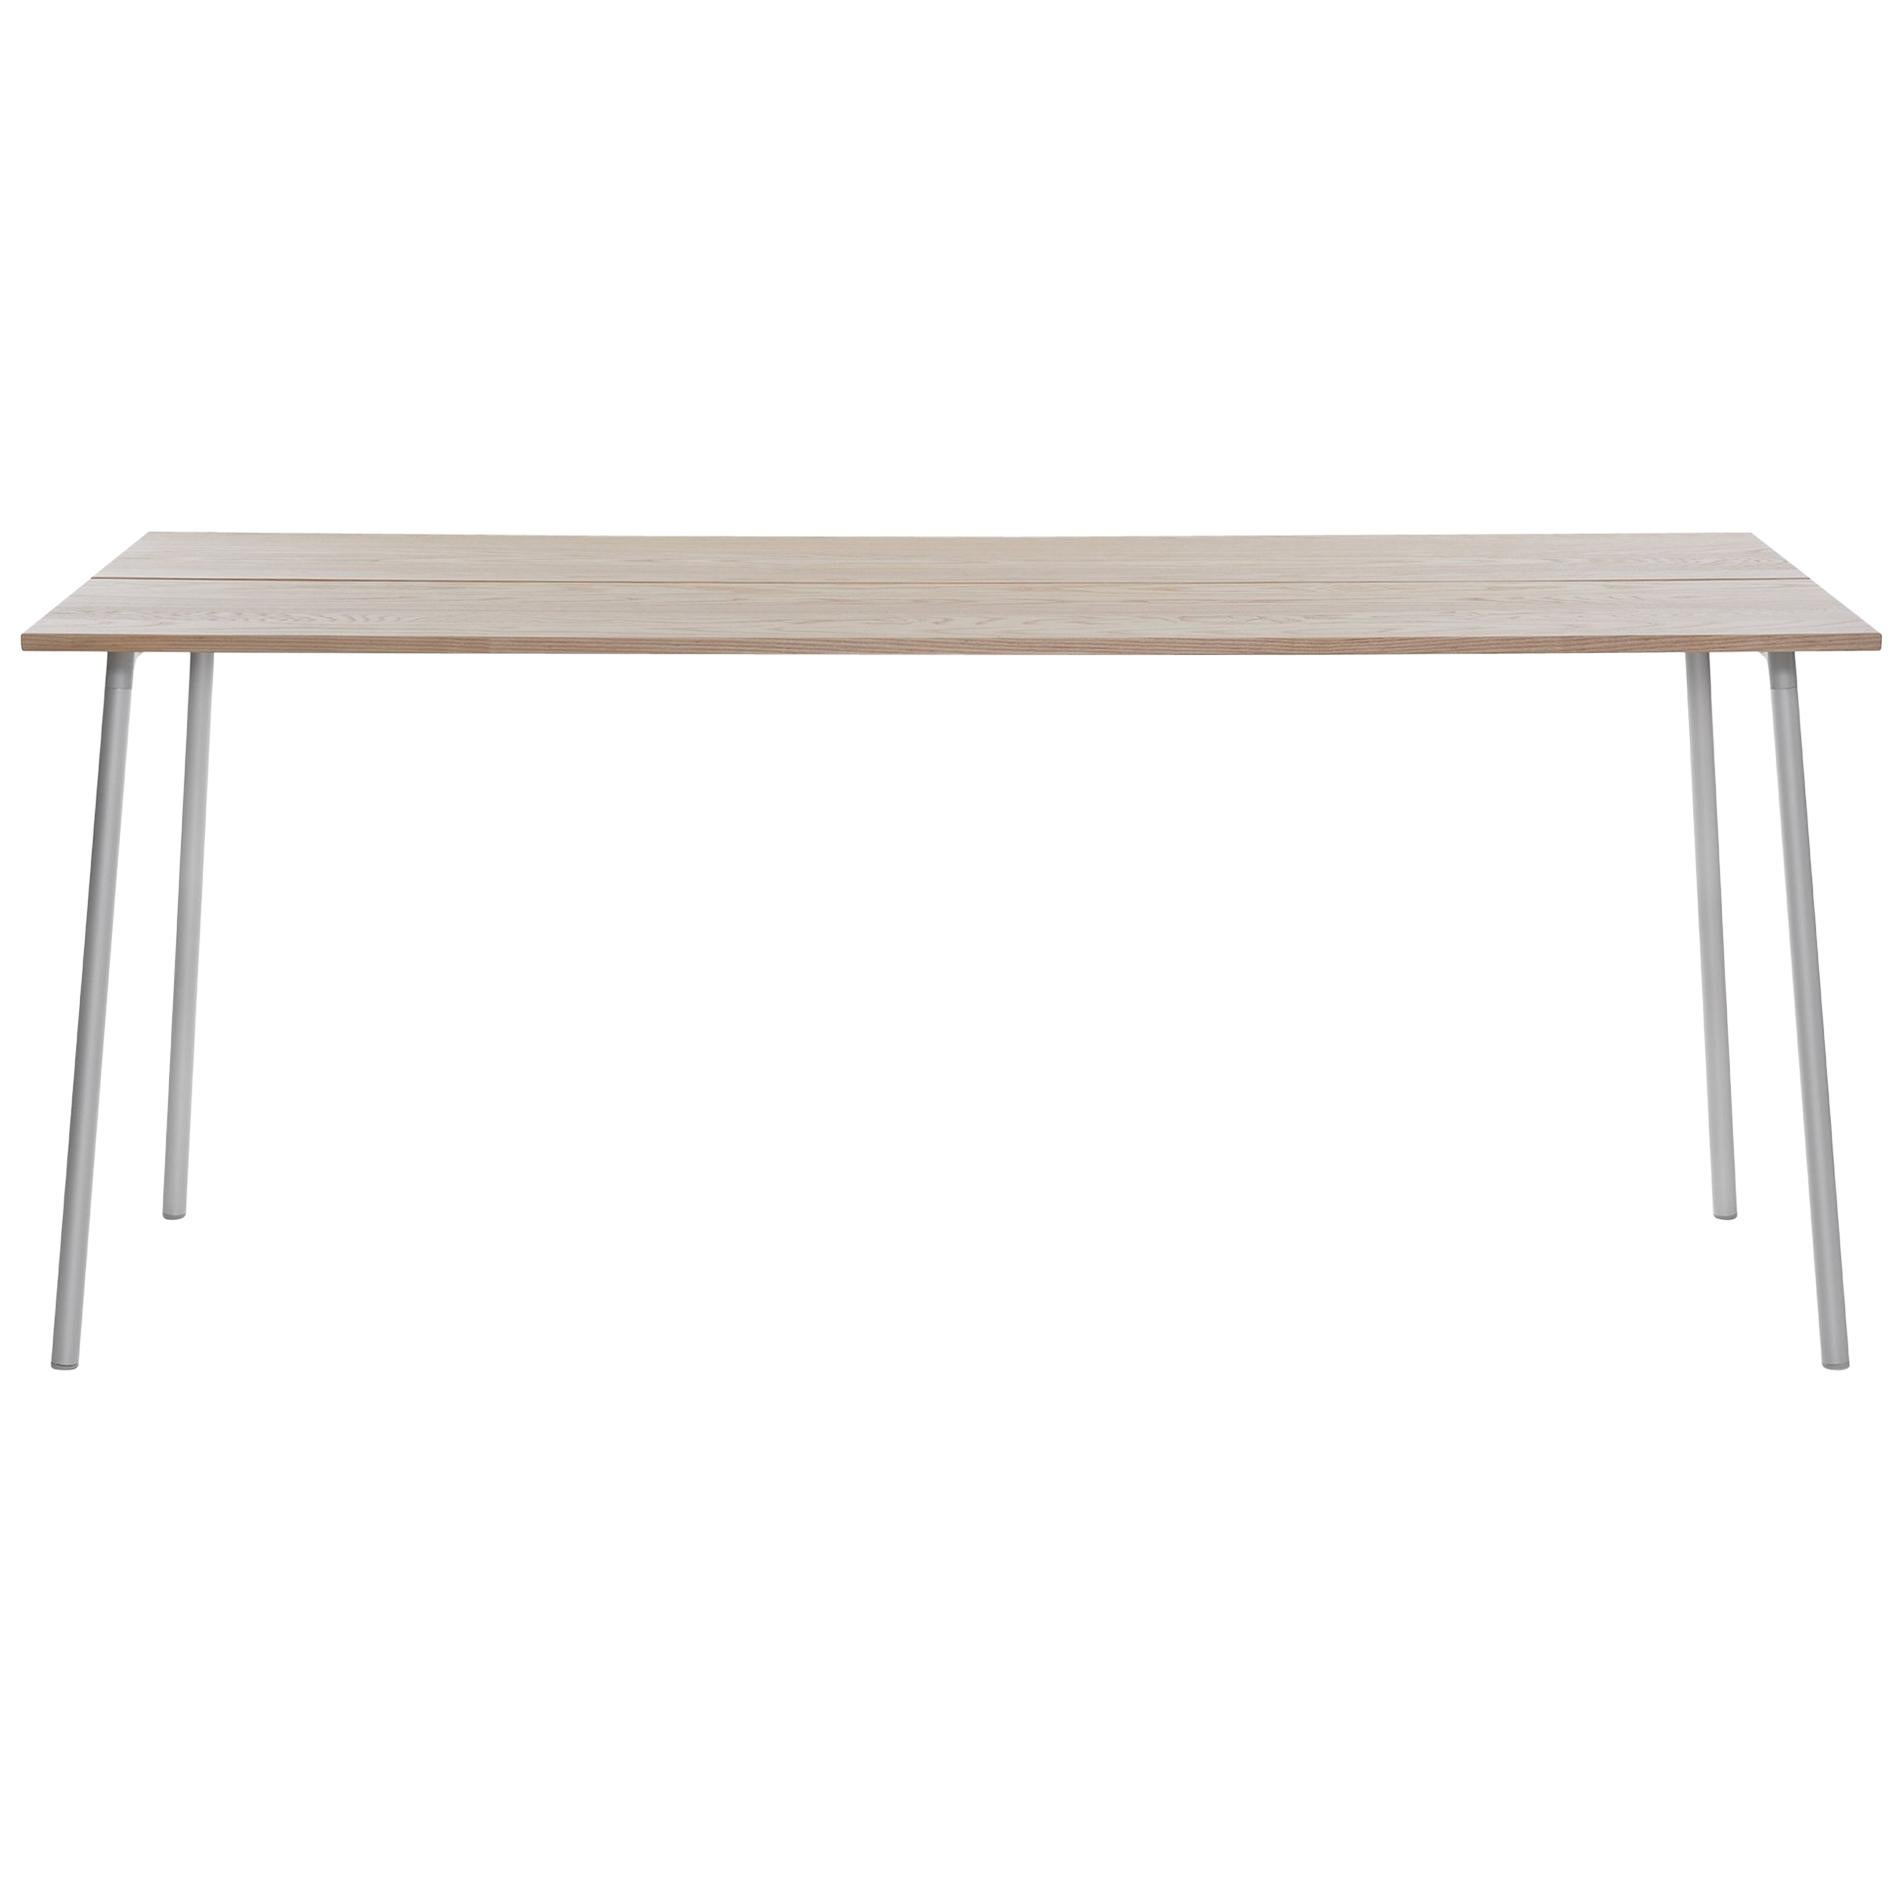 Emeco Run Extra Large Table in Clear Anodized & Ash by Sam Hecht + Kim Colin For Sale